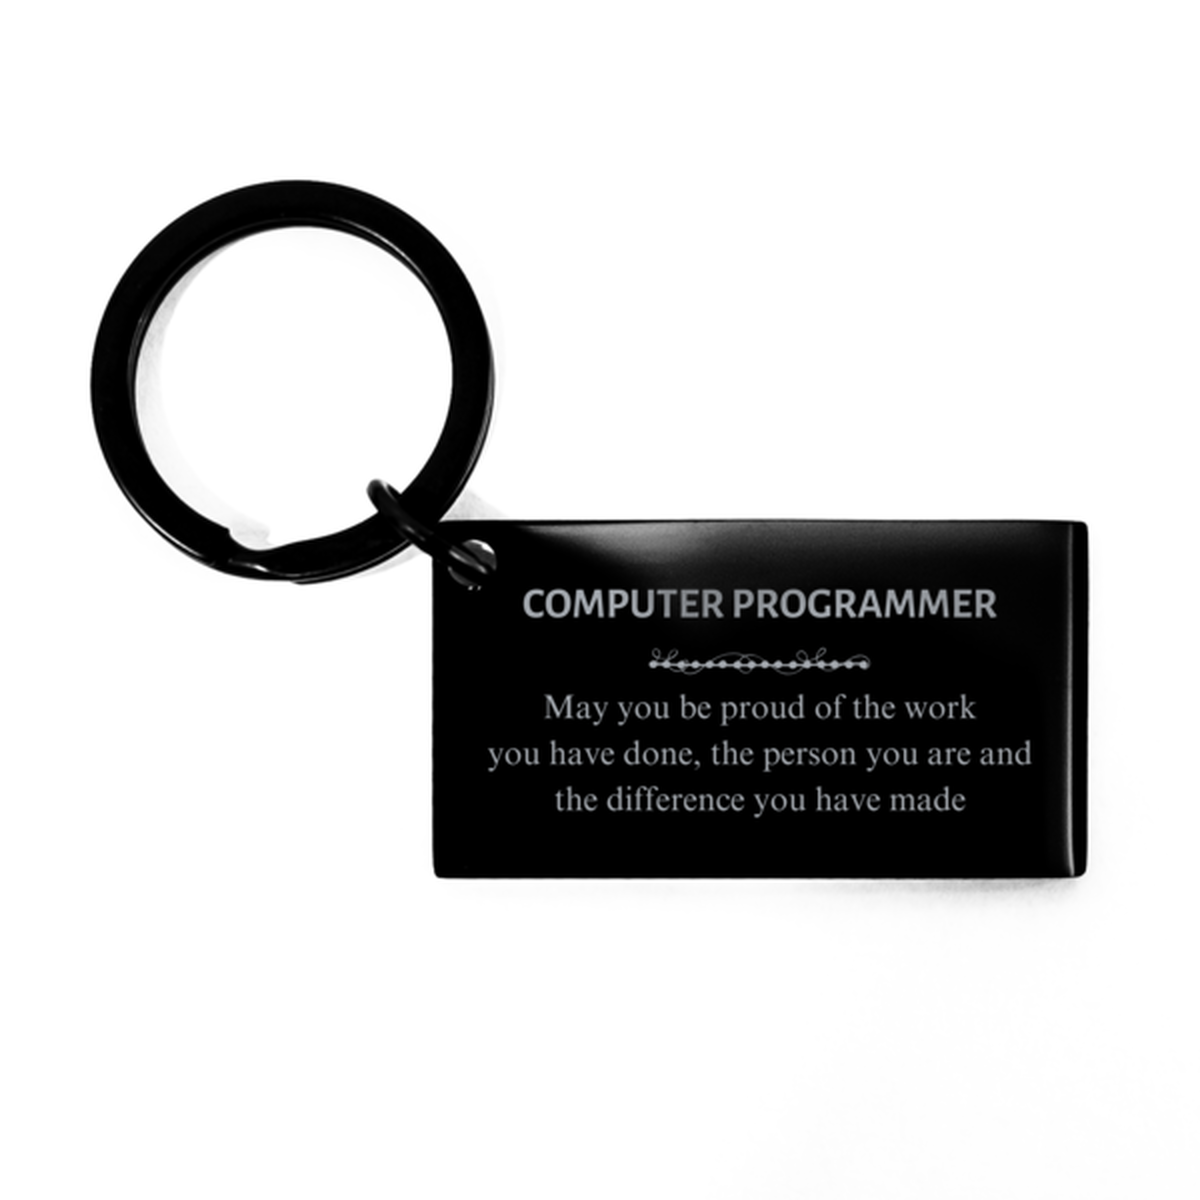 EMT May you be proud of the work you have done, Retirement Computer Programmer Keychain for Colleague Appreciation Gifts Amazing for Computer Programmer